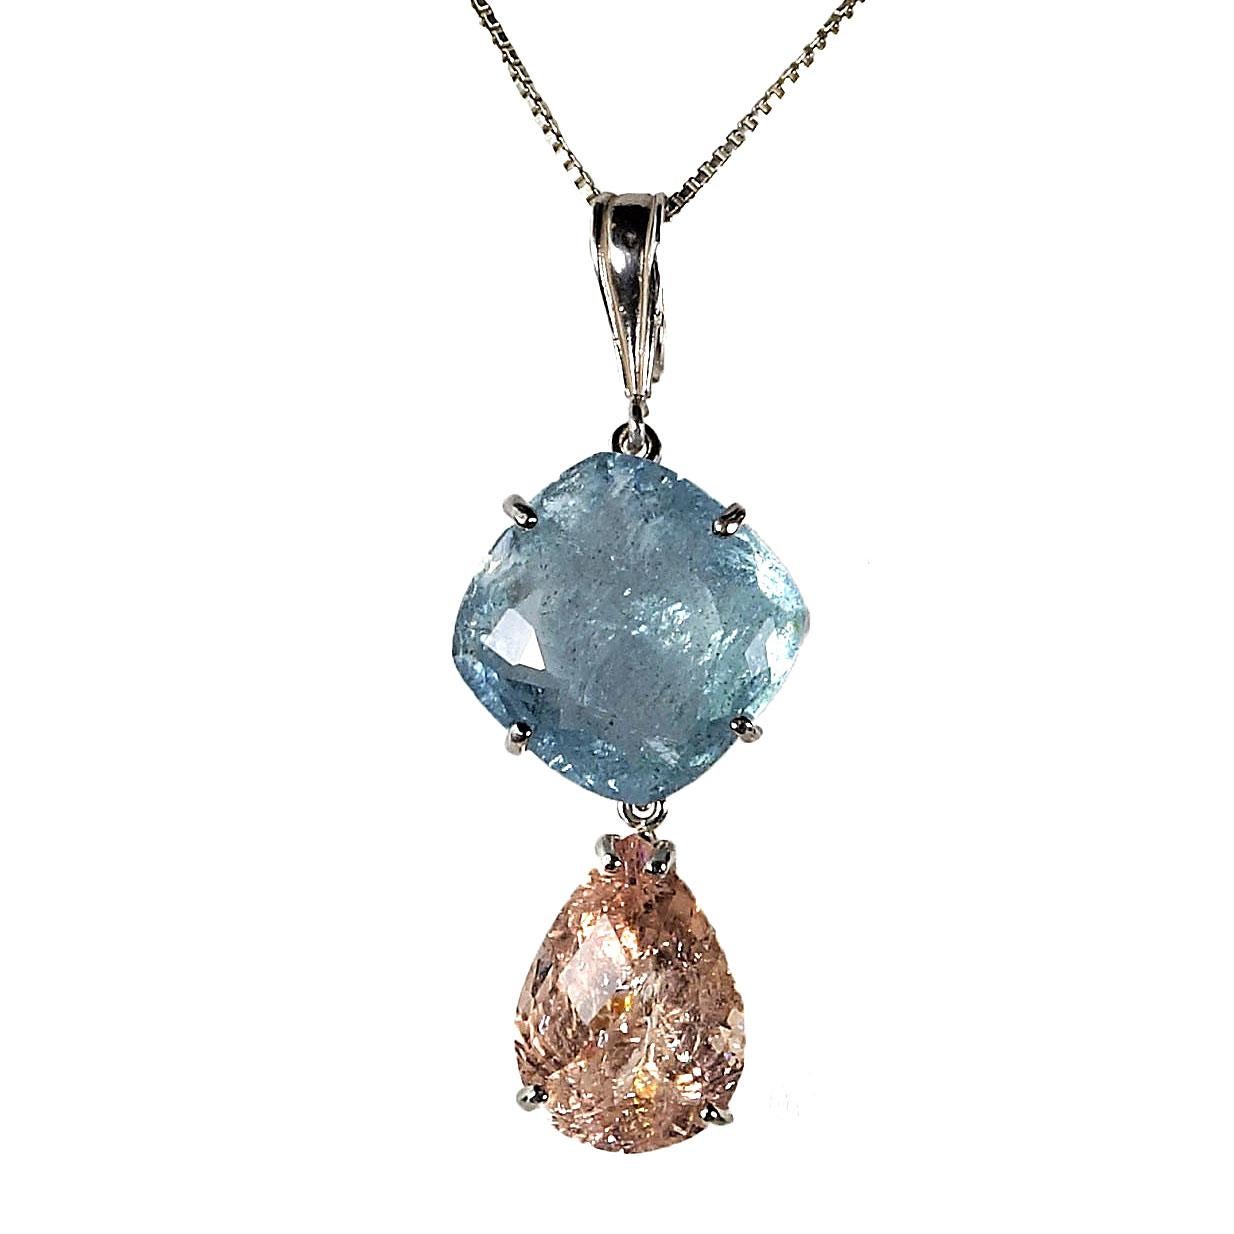 Custom made Sterling Silver Pendant of Blue Aquamarine and Peach Morganite. This lovely beryl pendant features a cushion cut Aquamarine (18 x 18 MM) paired with a pear shape Morganite (18 x 13 MM). The hinged bail fits over your favorite pearls,